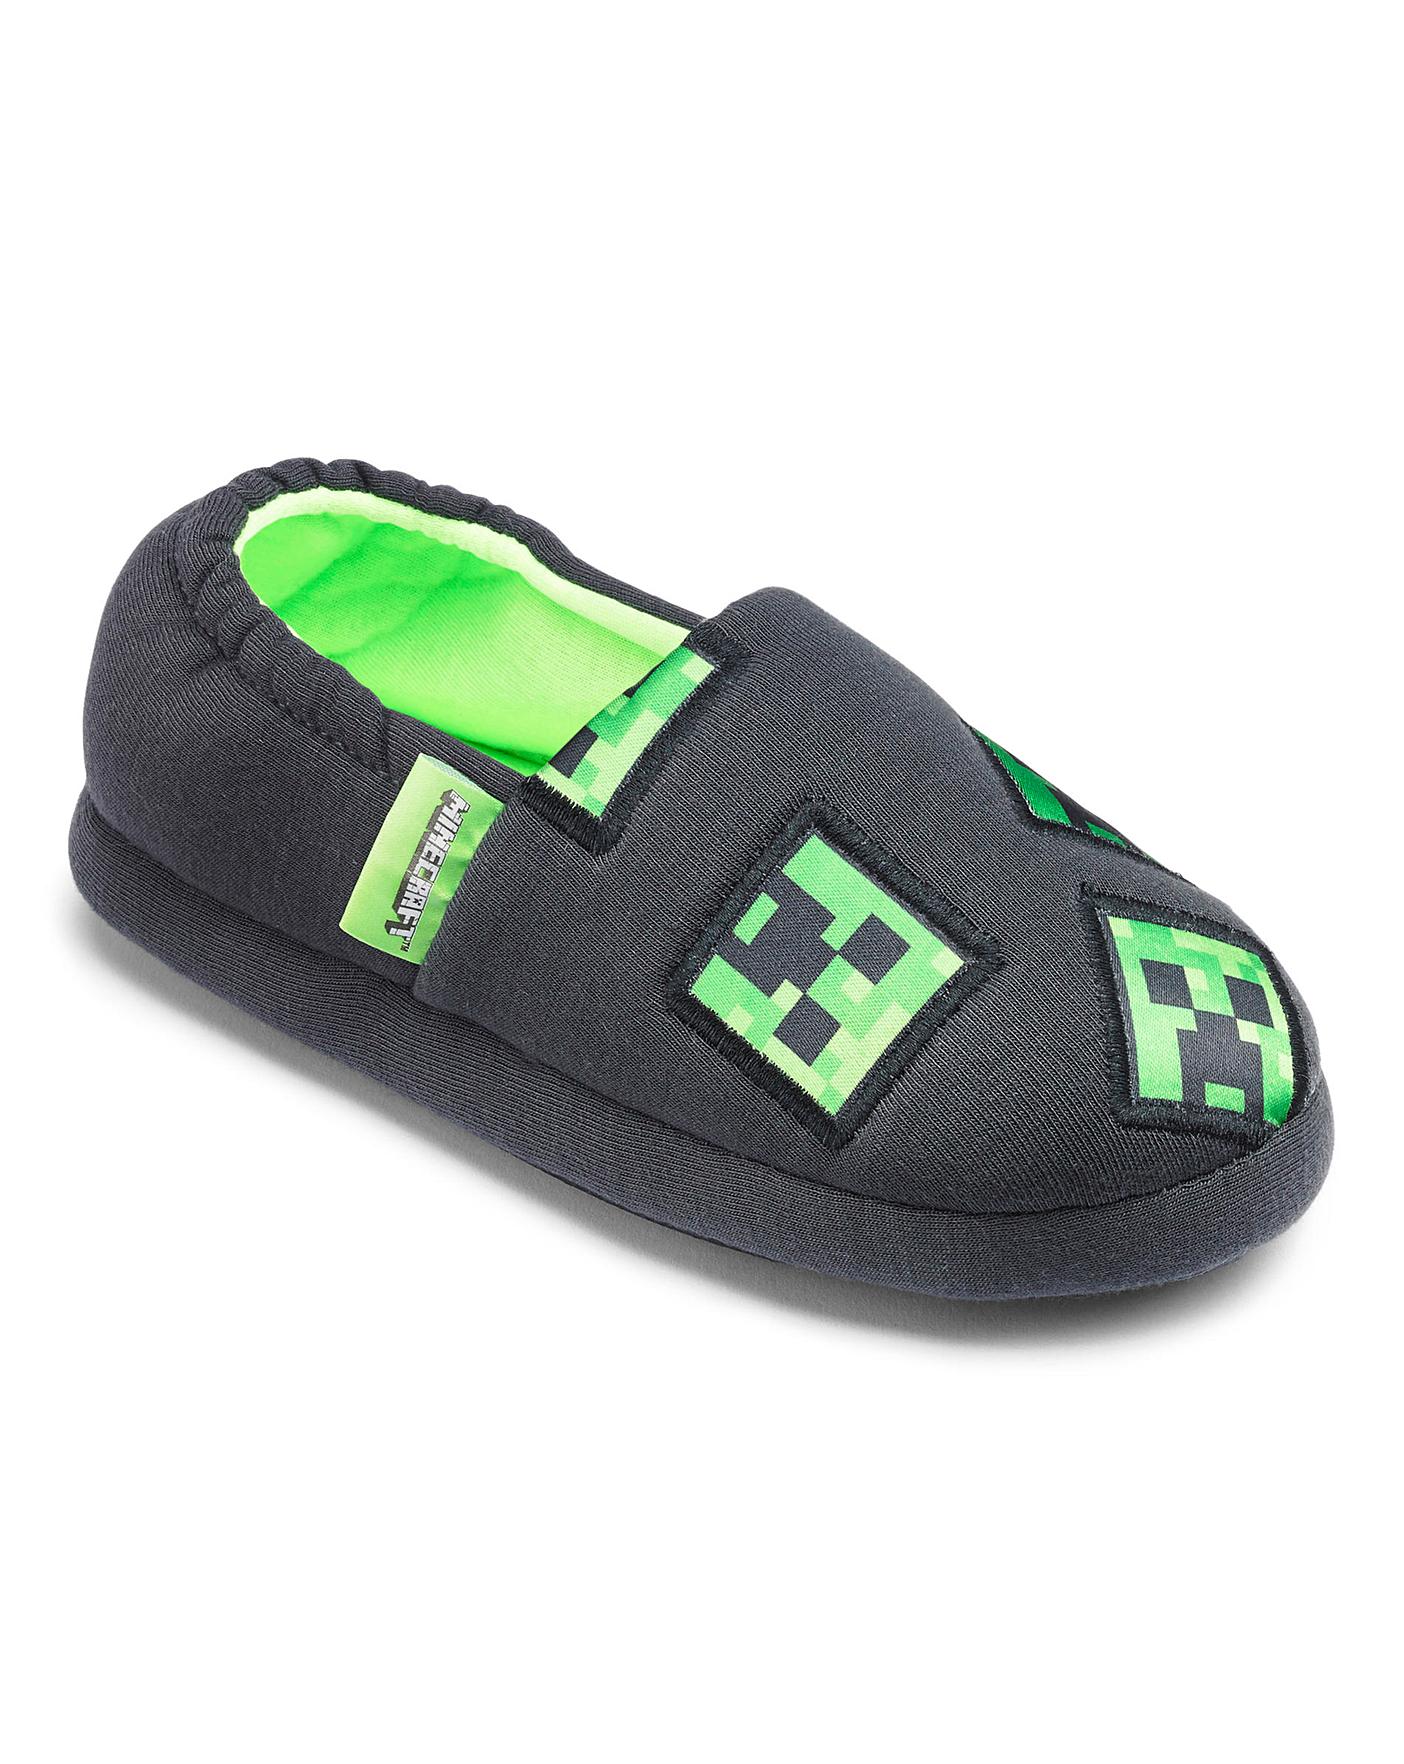 Boys Minecraft Slippers | Oxendales